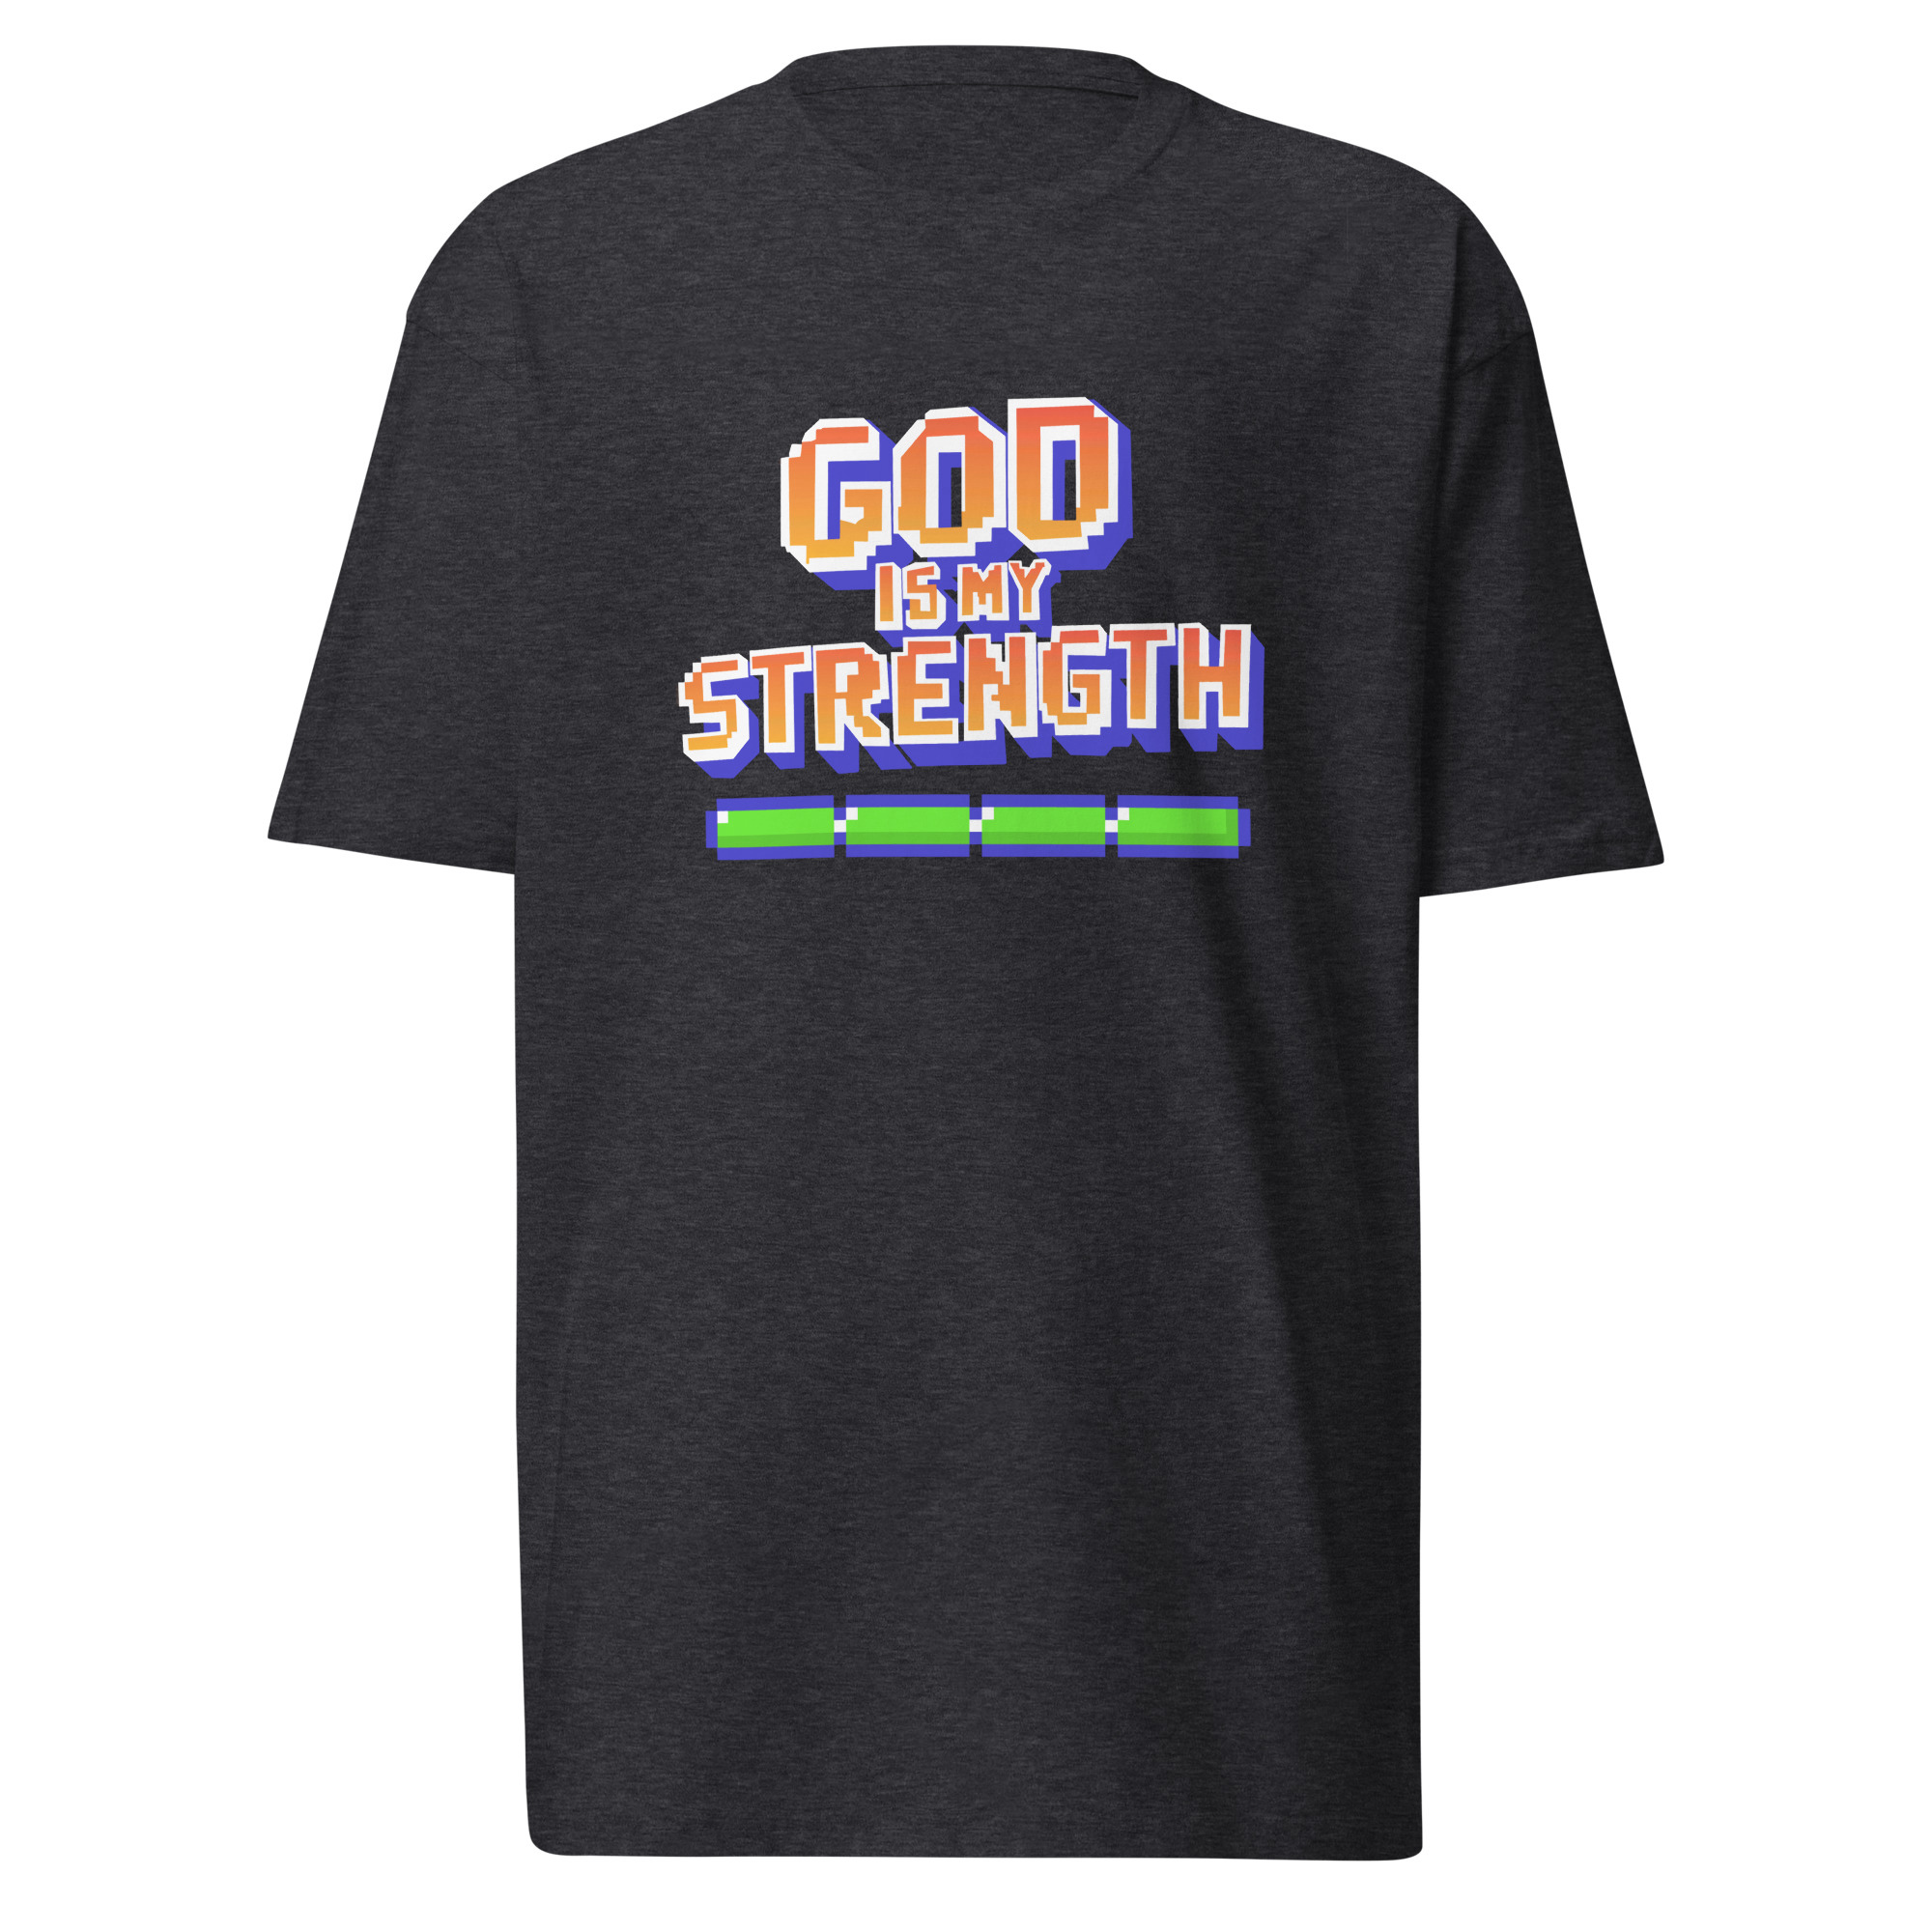 God is my Strength T-Shirt - Charcoal Heather / S